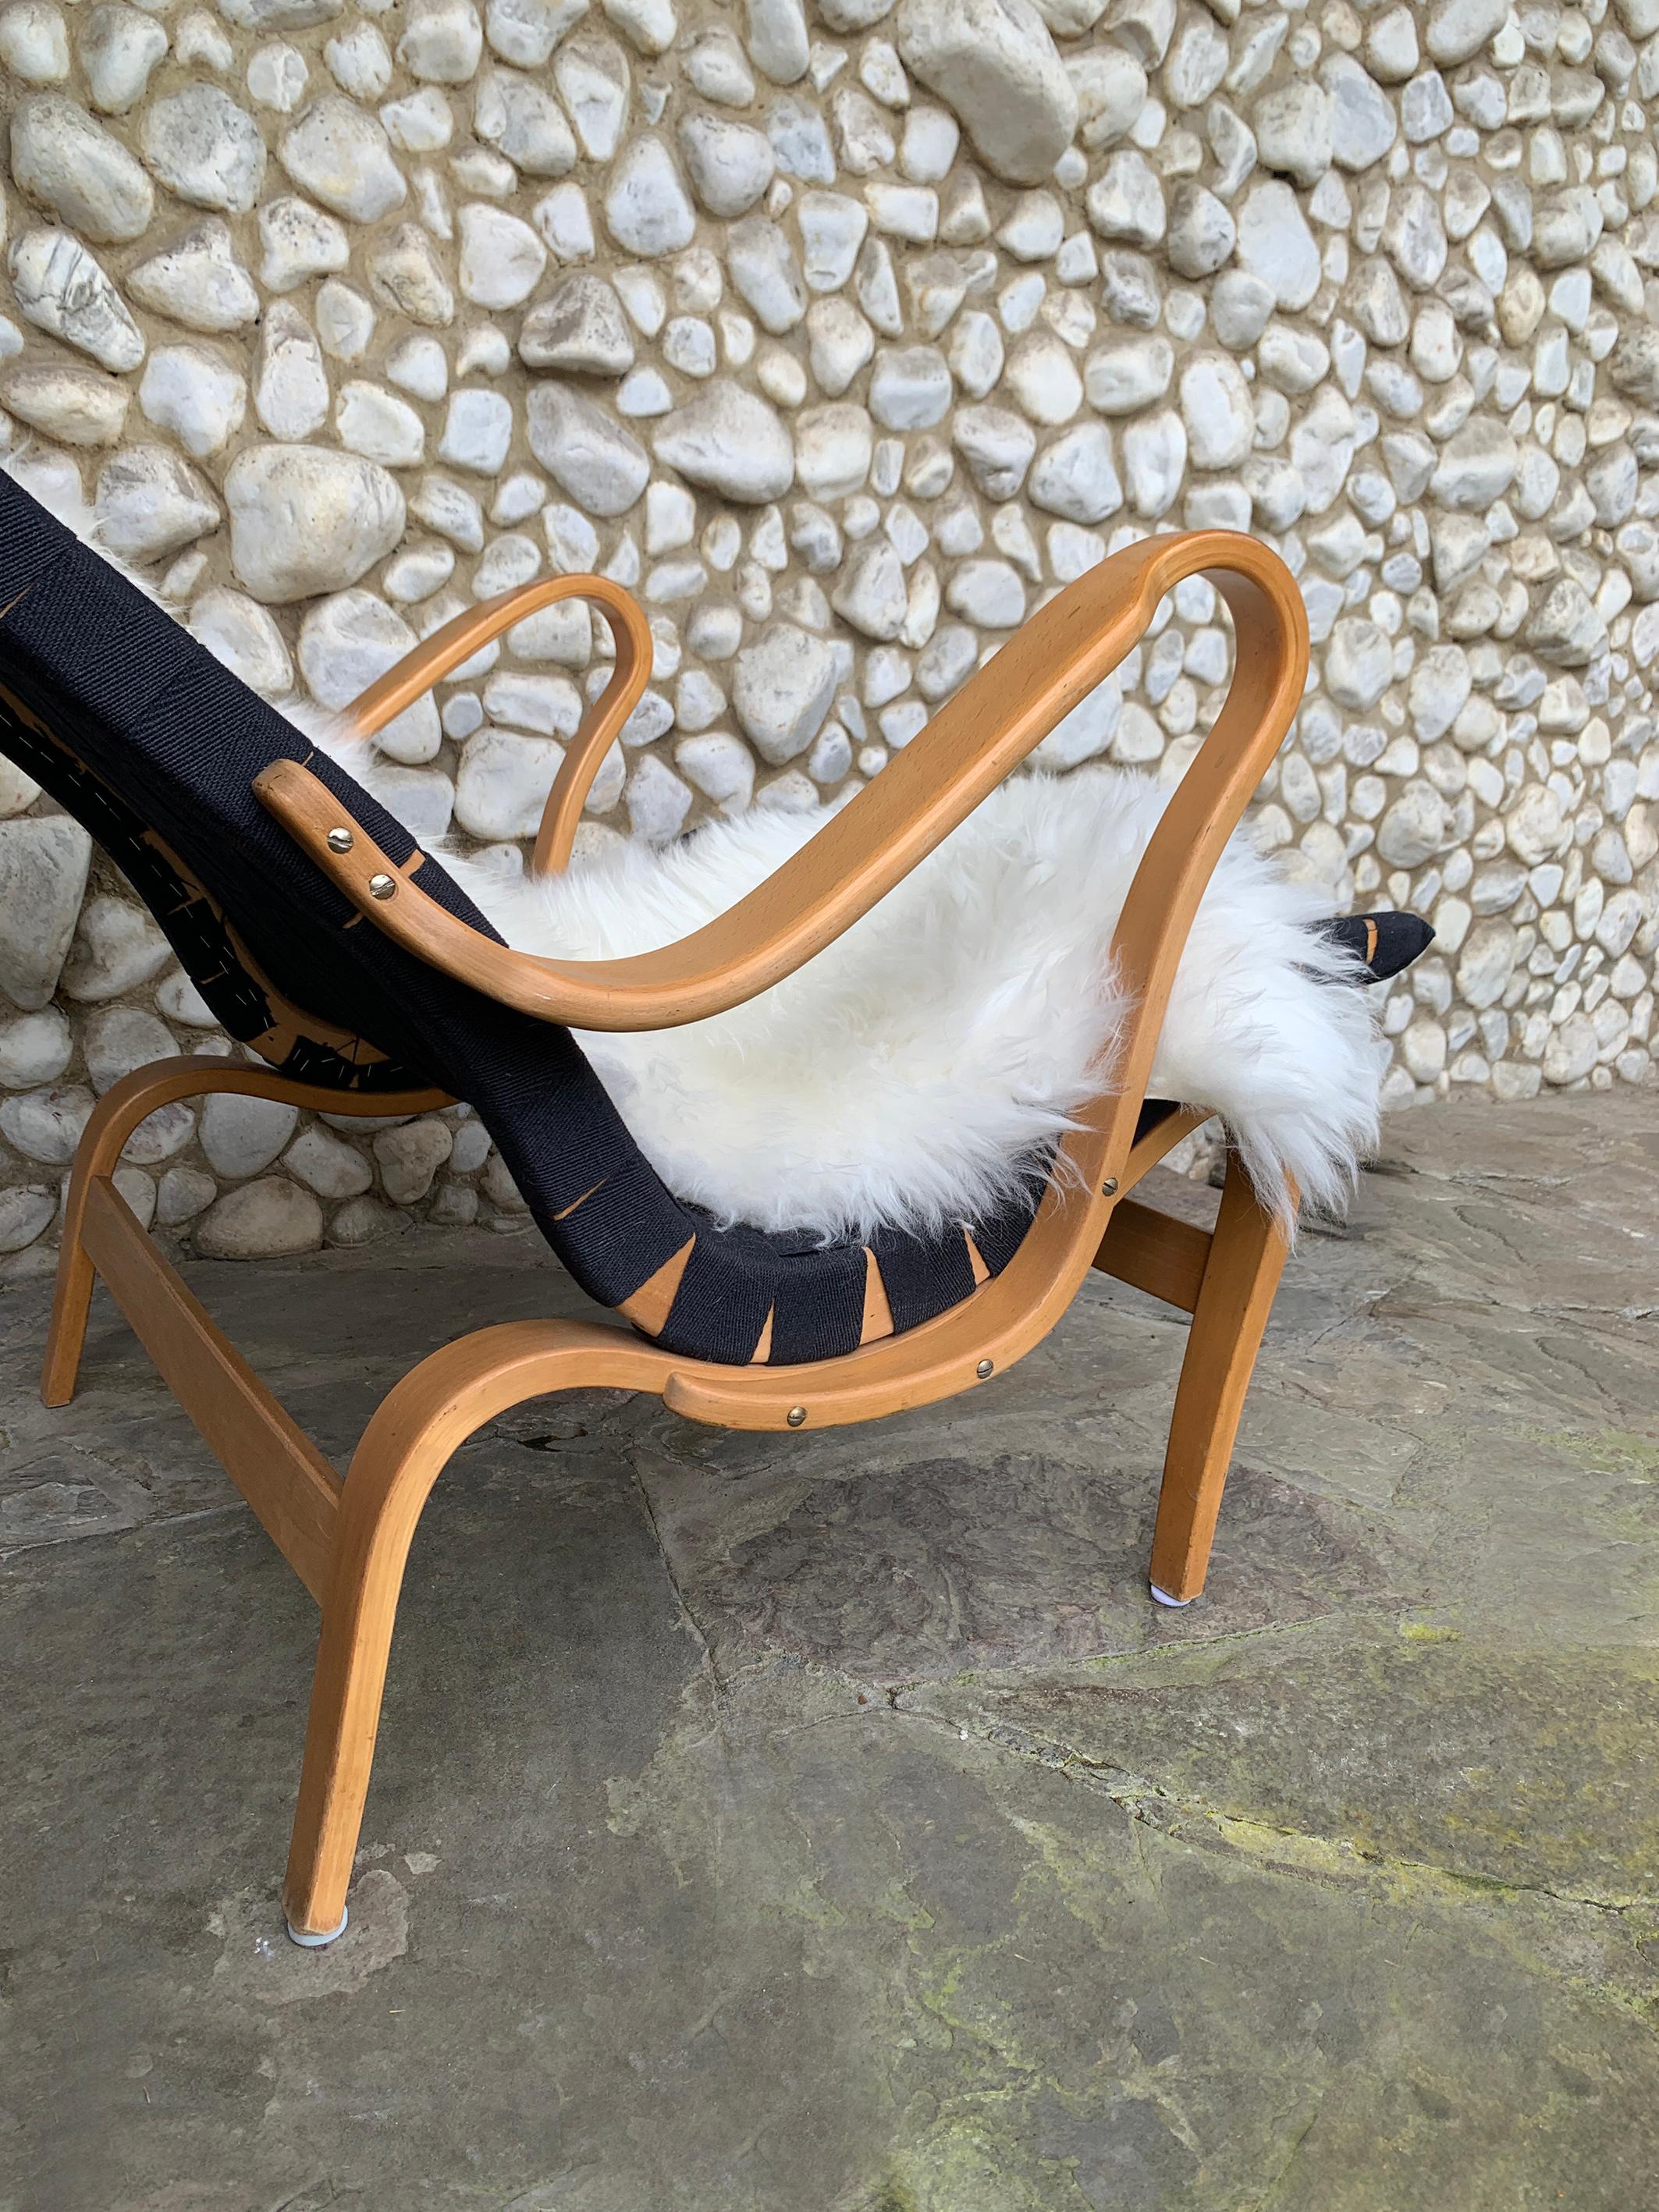 Sheepskin Pernilla Lounge Arm Chair in beech & black canvas by Bruno Mathsson, Sweden 1970 For Sale